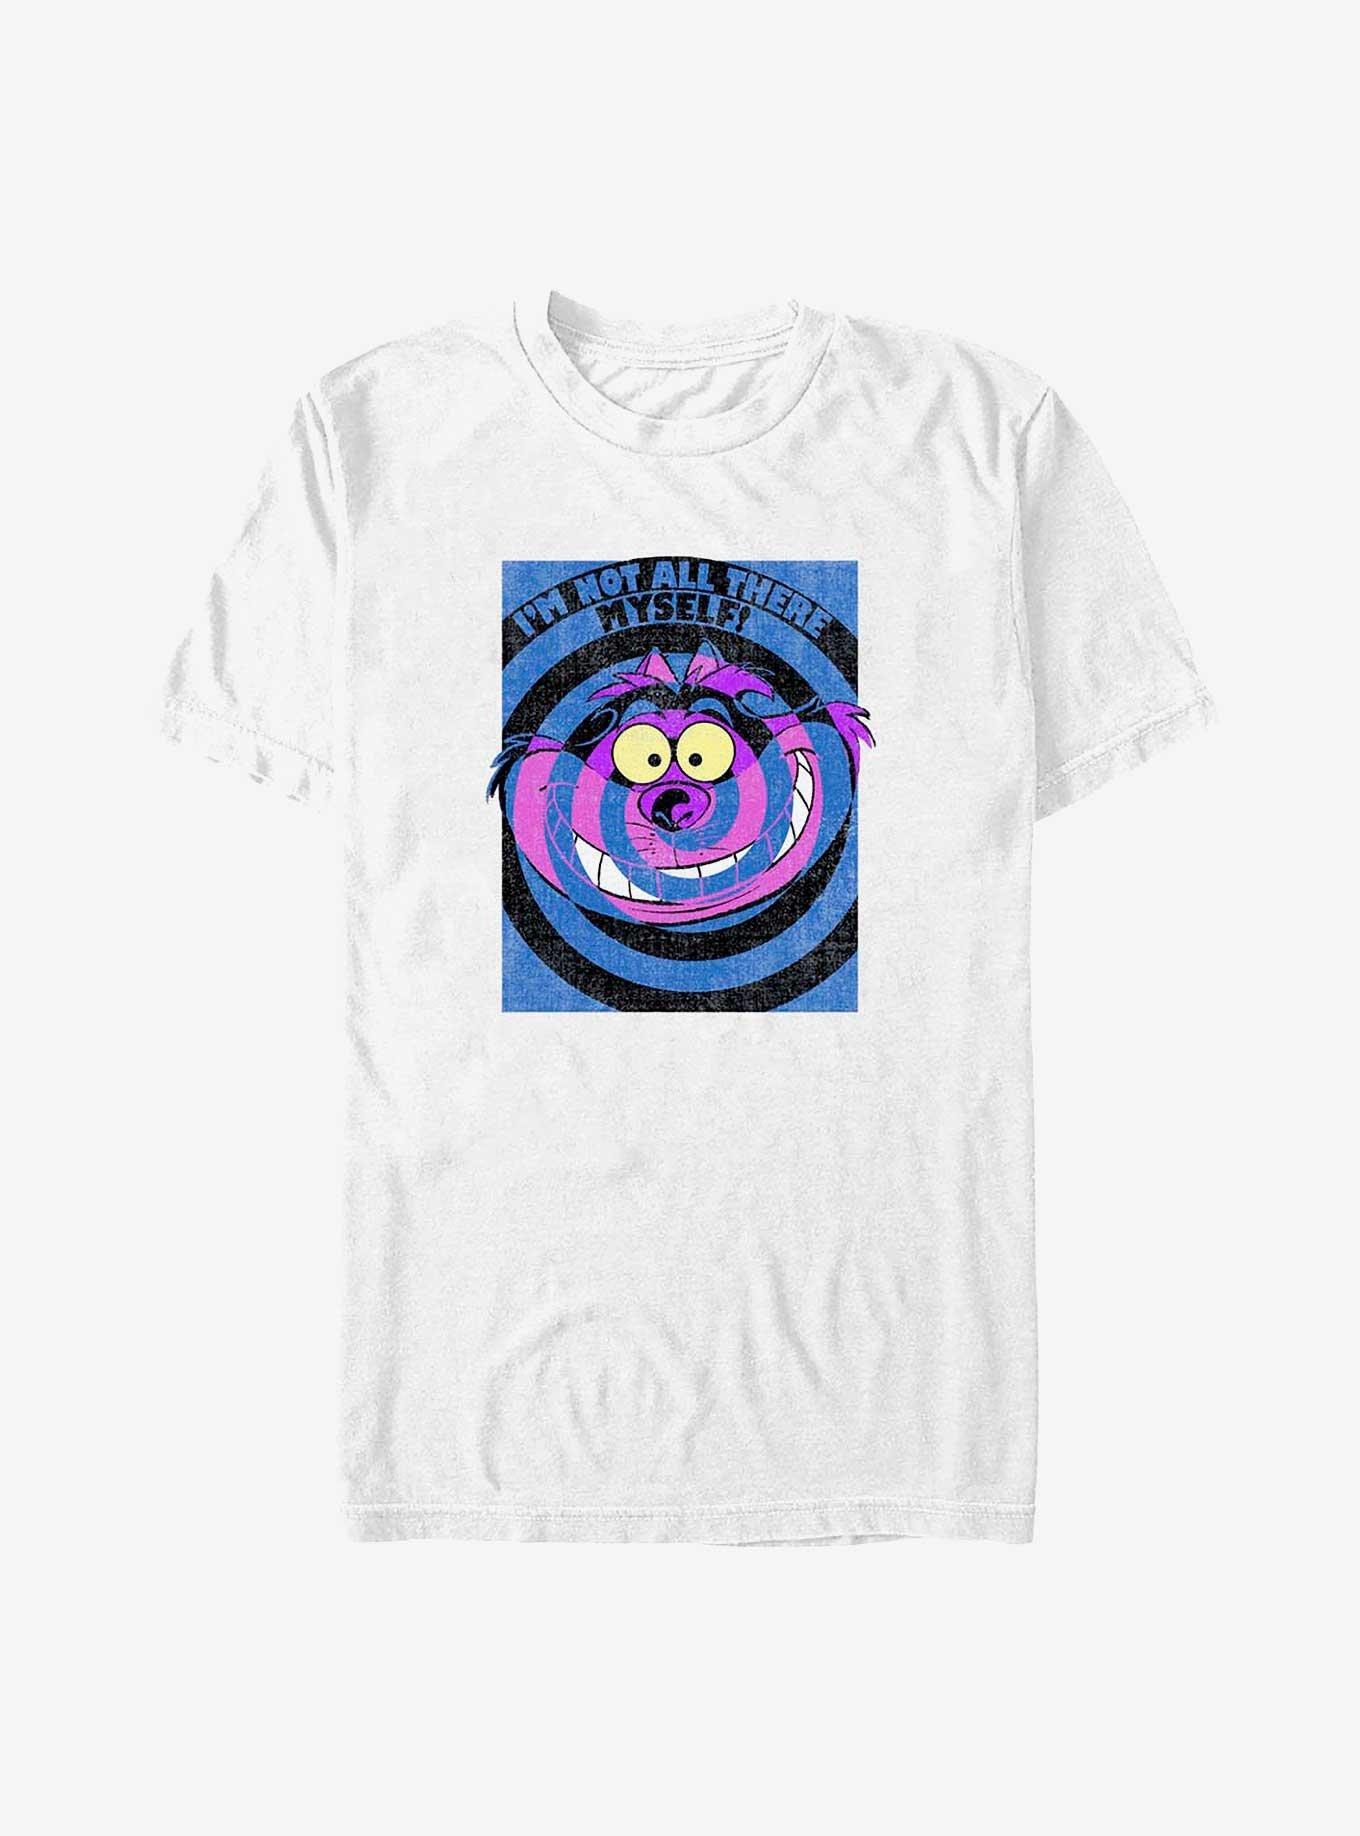 Disney Alice In Wonderland Cheshire Not All There T-Shirt, WHITE, hi-res